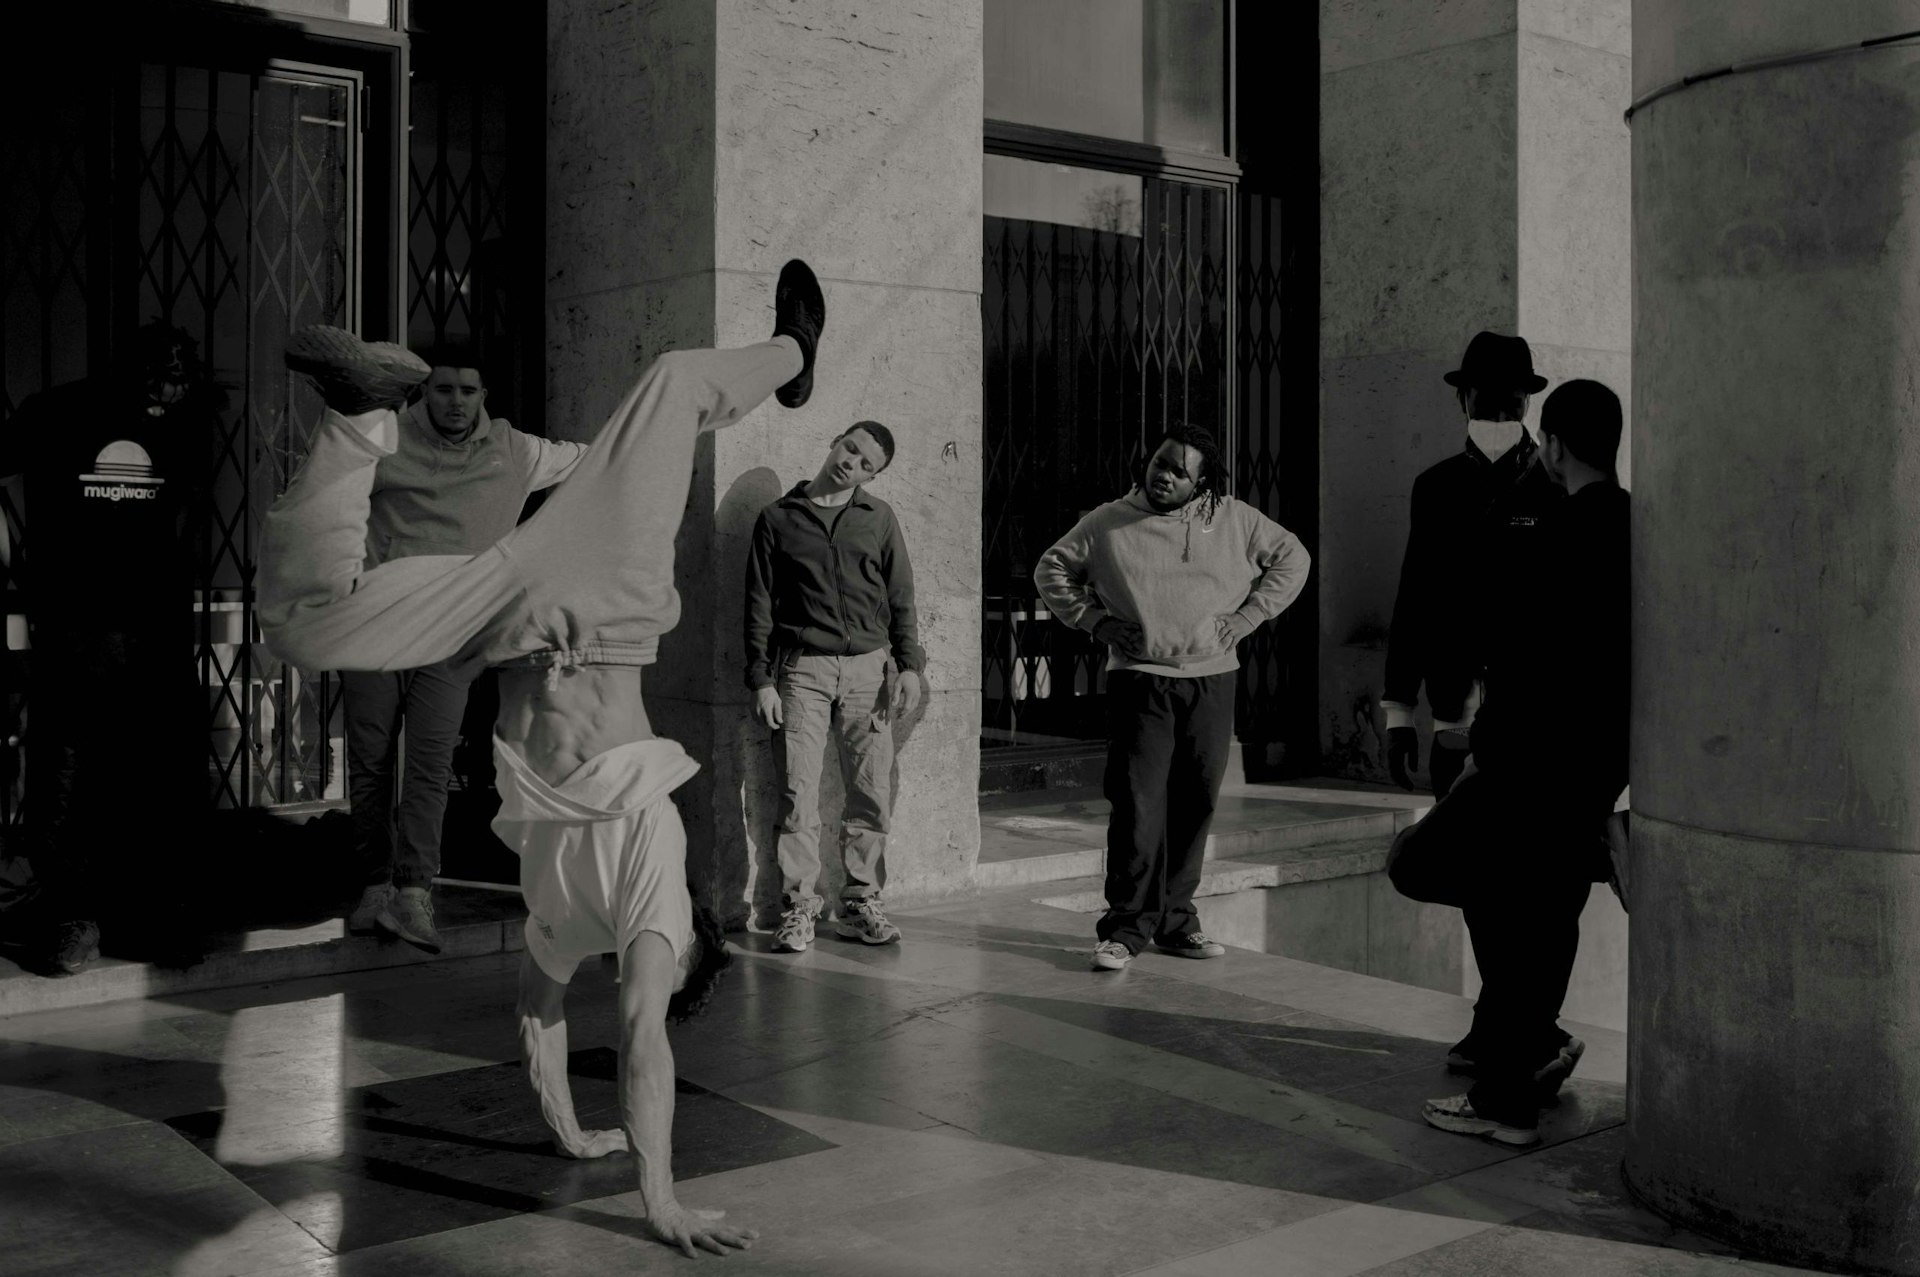 The radical history of Paris b-boy culture is under threat